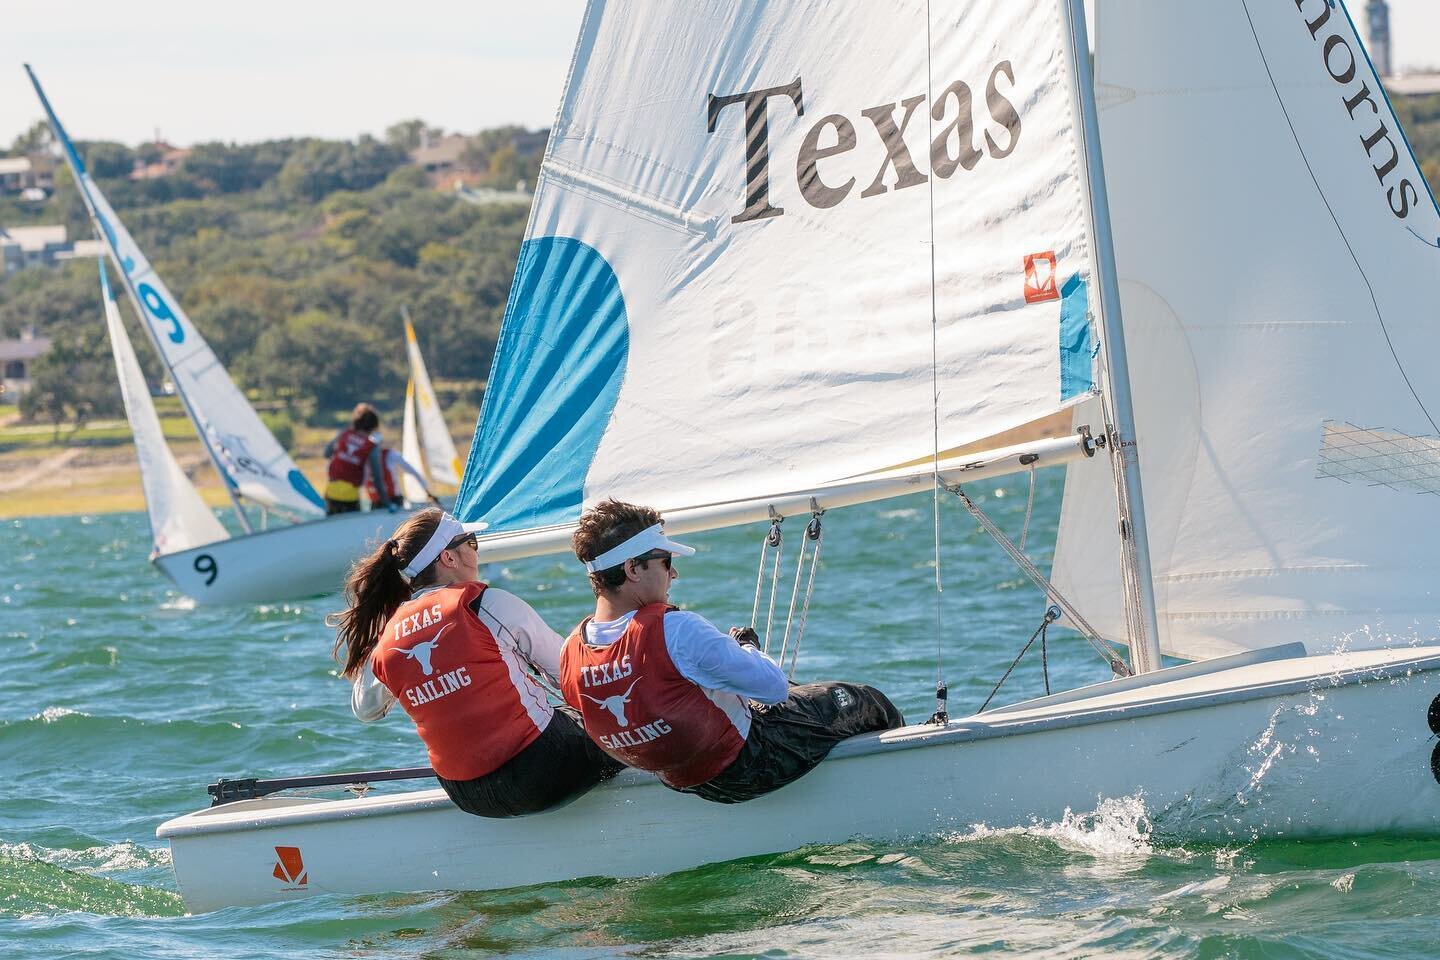 Congrats to our Longhorn sailors for placing first and second at our annual Kathryn Hammond Regatta this past weekend!

Kathryn Hammond was a UT Sailing Team alum and teacher who tragically passed in a car accident in 1999. This regatta was named aft